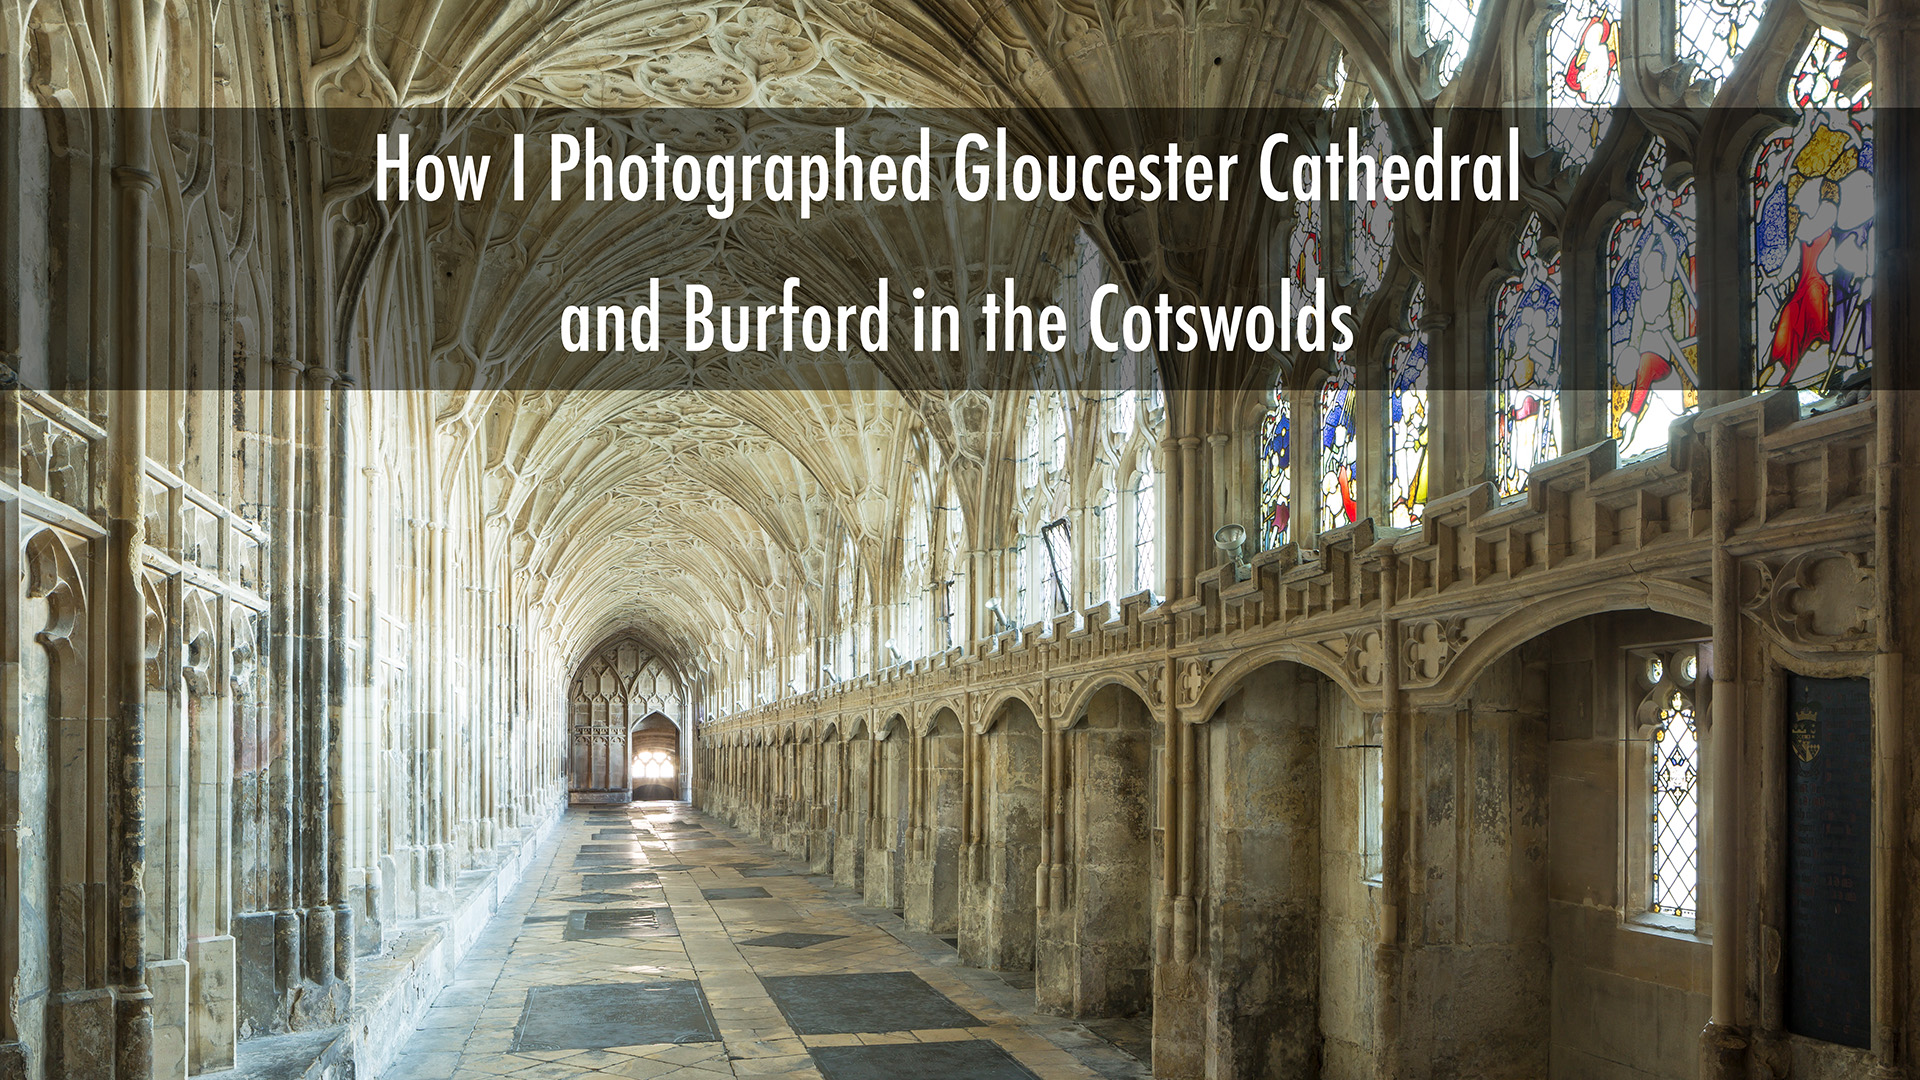 How I Photographed Gloucester cathedral and Burford in the Cotswolds.